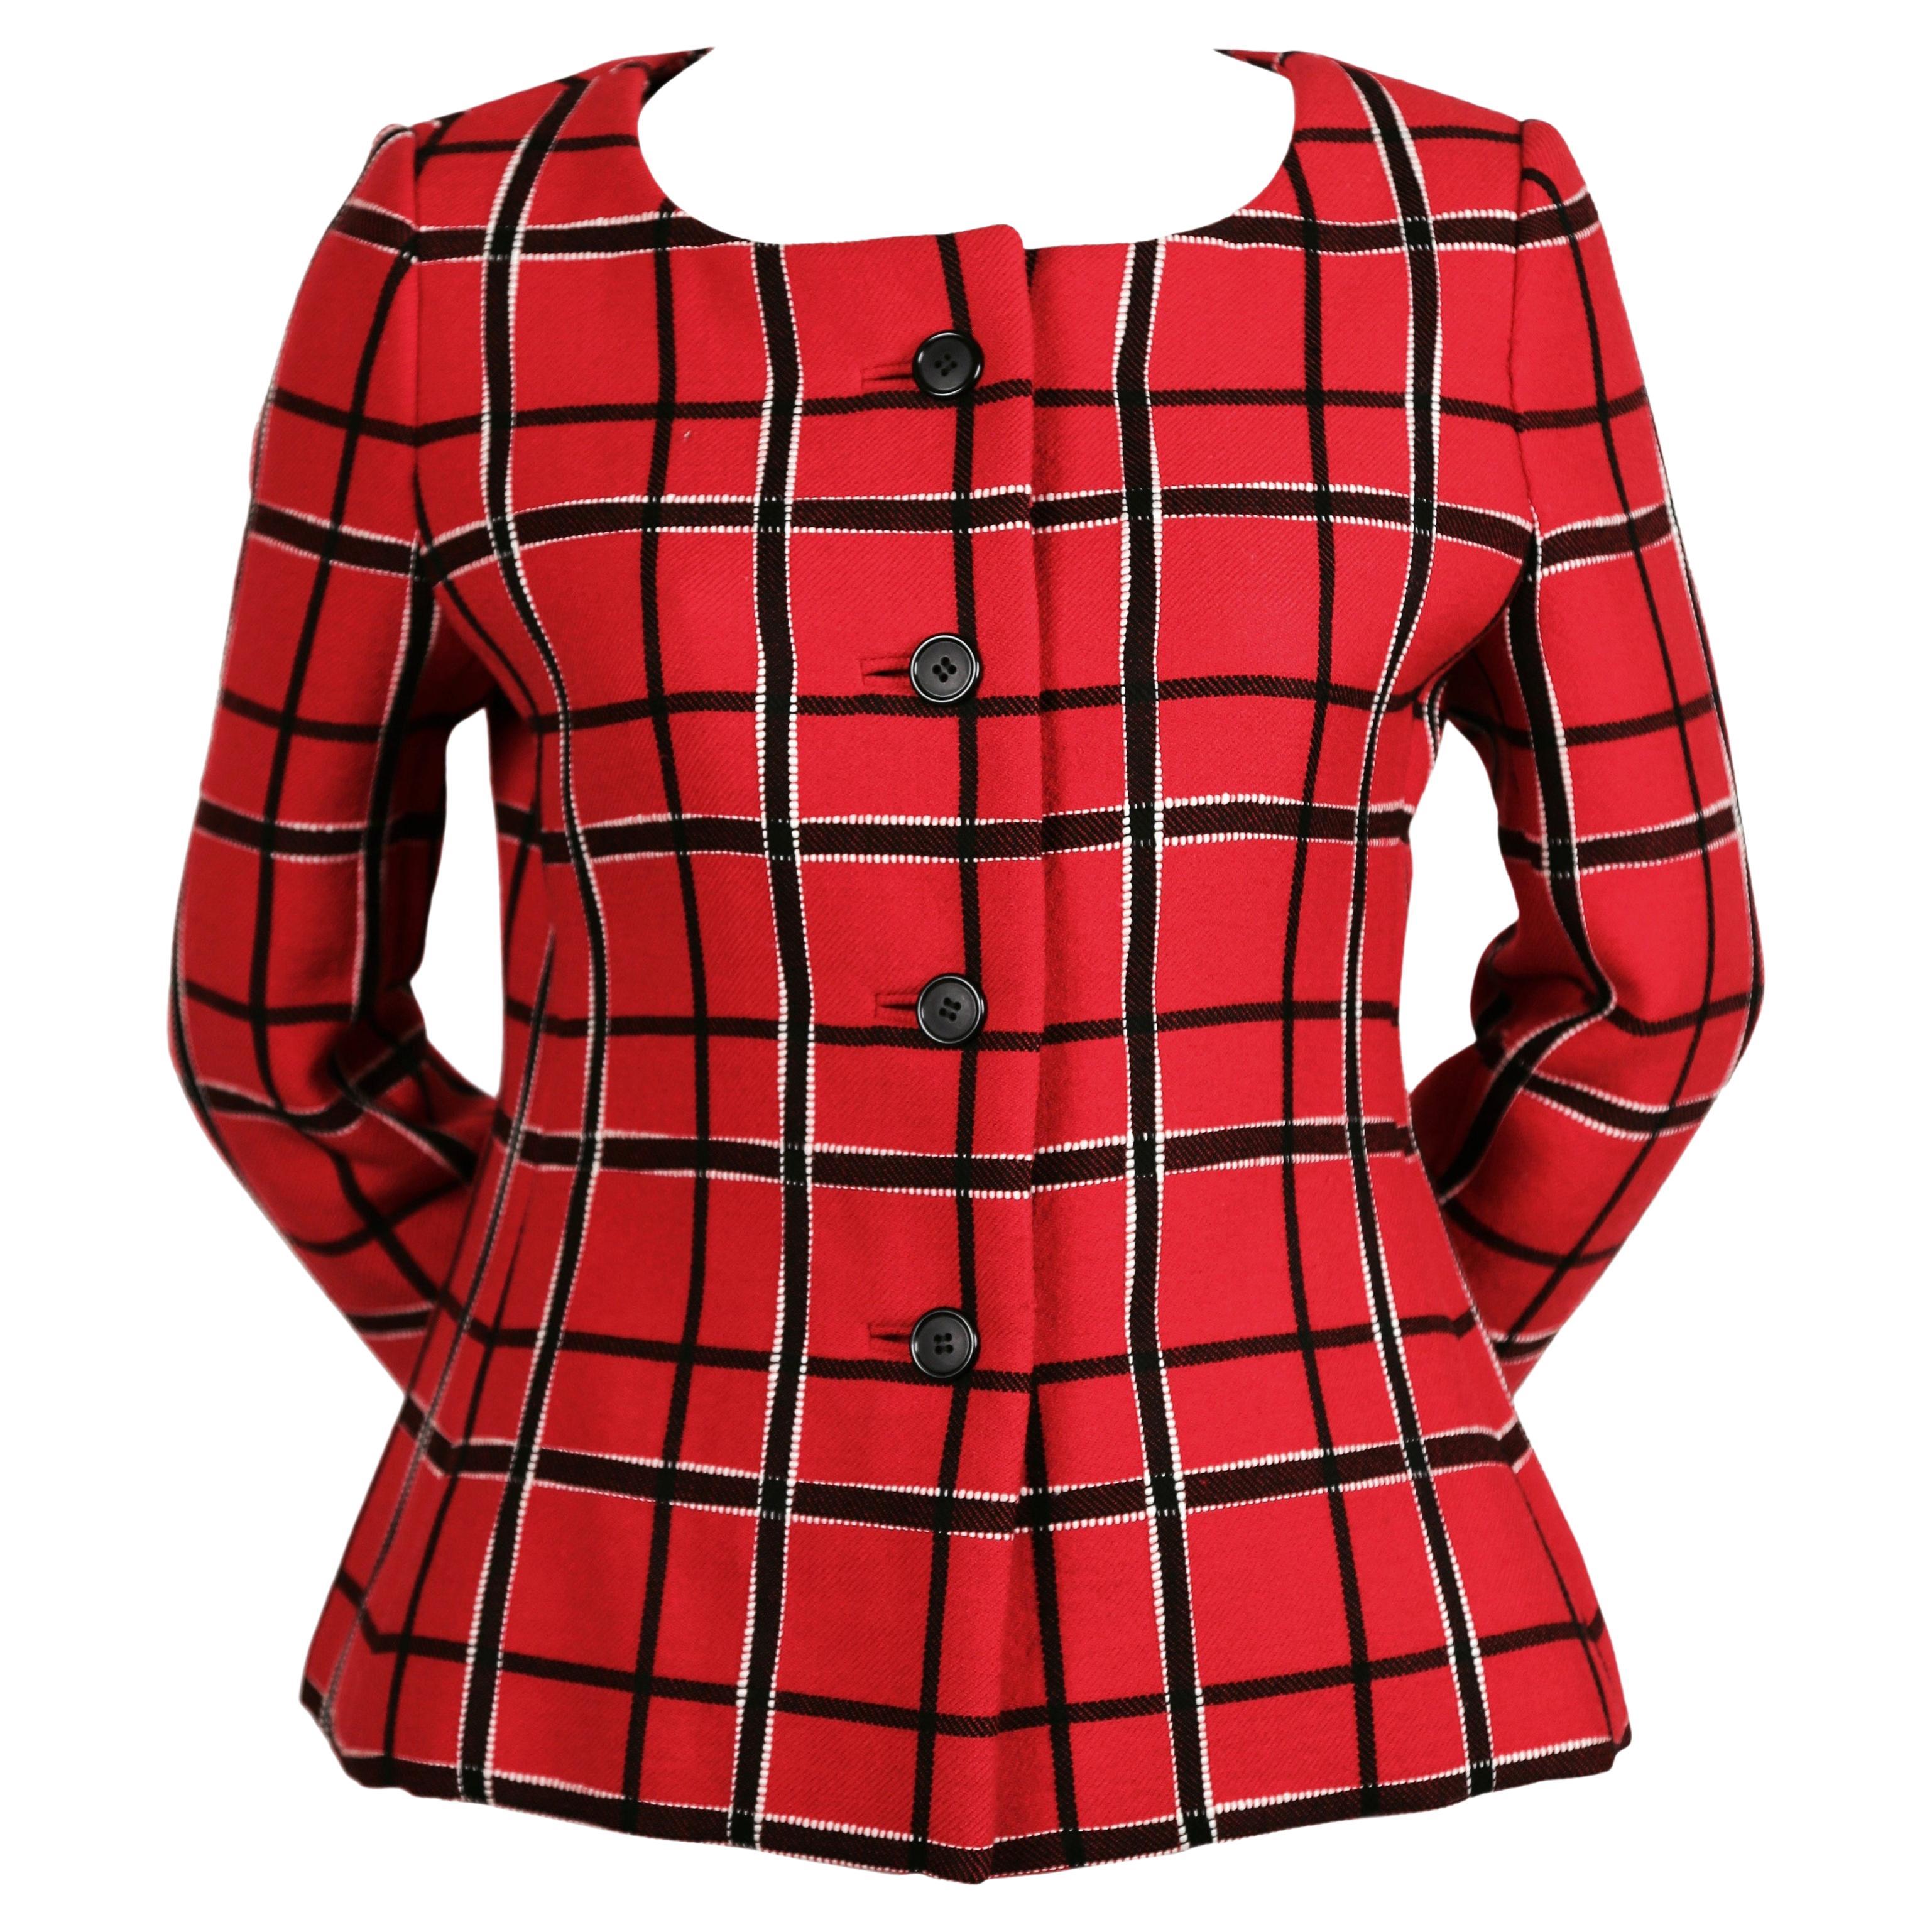 1960's JAMES GALANOS for Amelia Gray red & black wool jacket